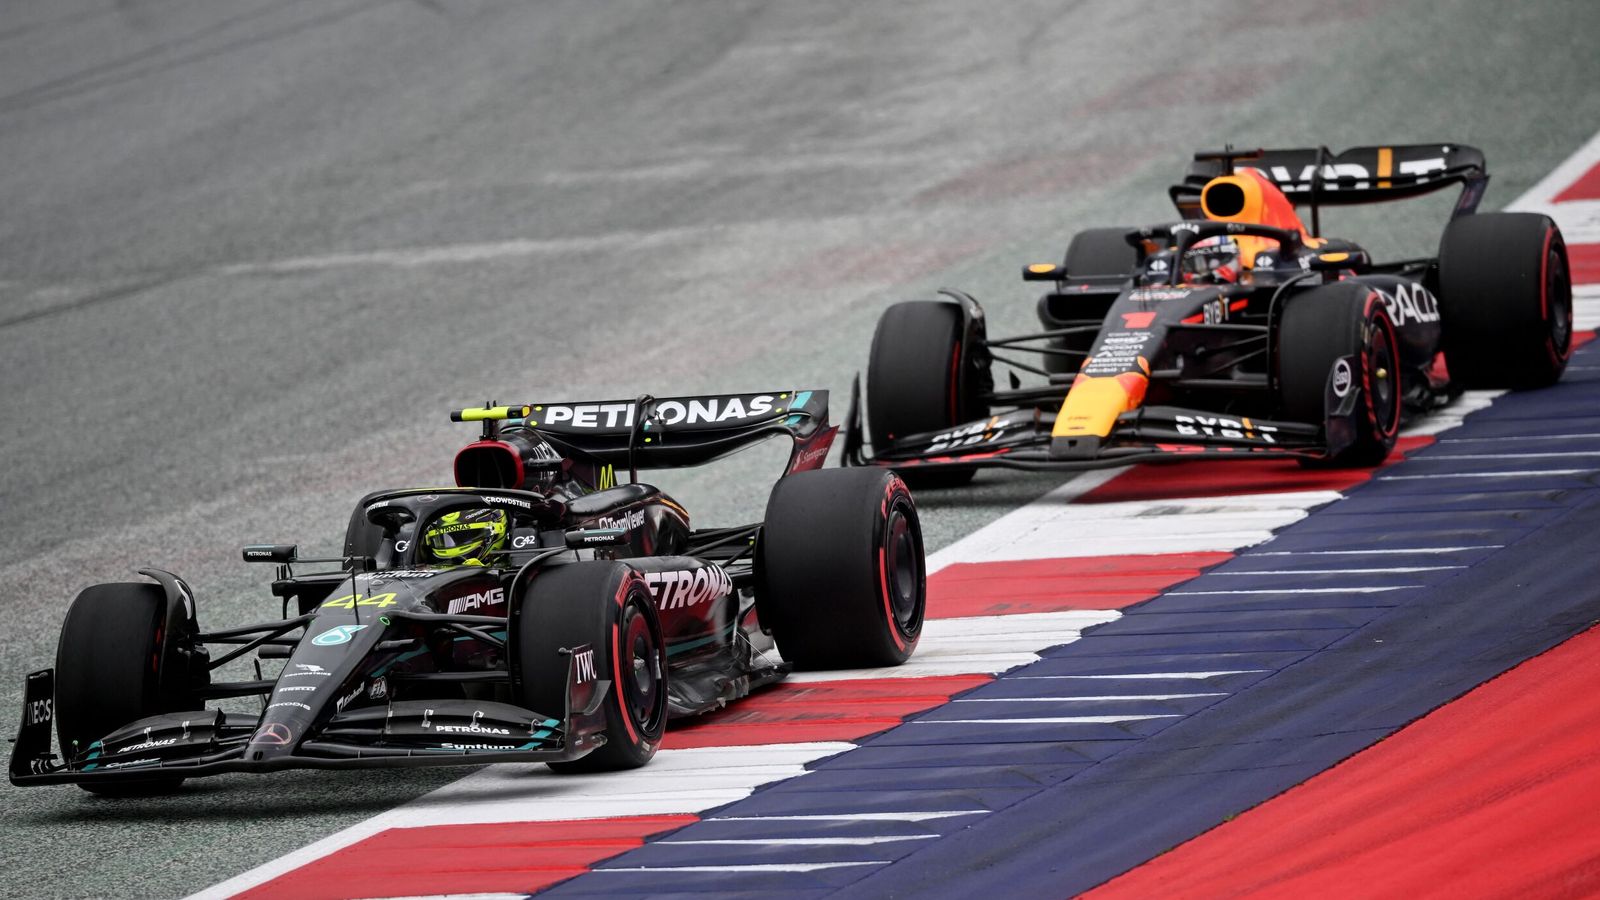 Max Verstappen committed ‘revenge foul’ on Lewis Hamilton in Austrian GP Sprint Shootout, says Toto Wolff